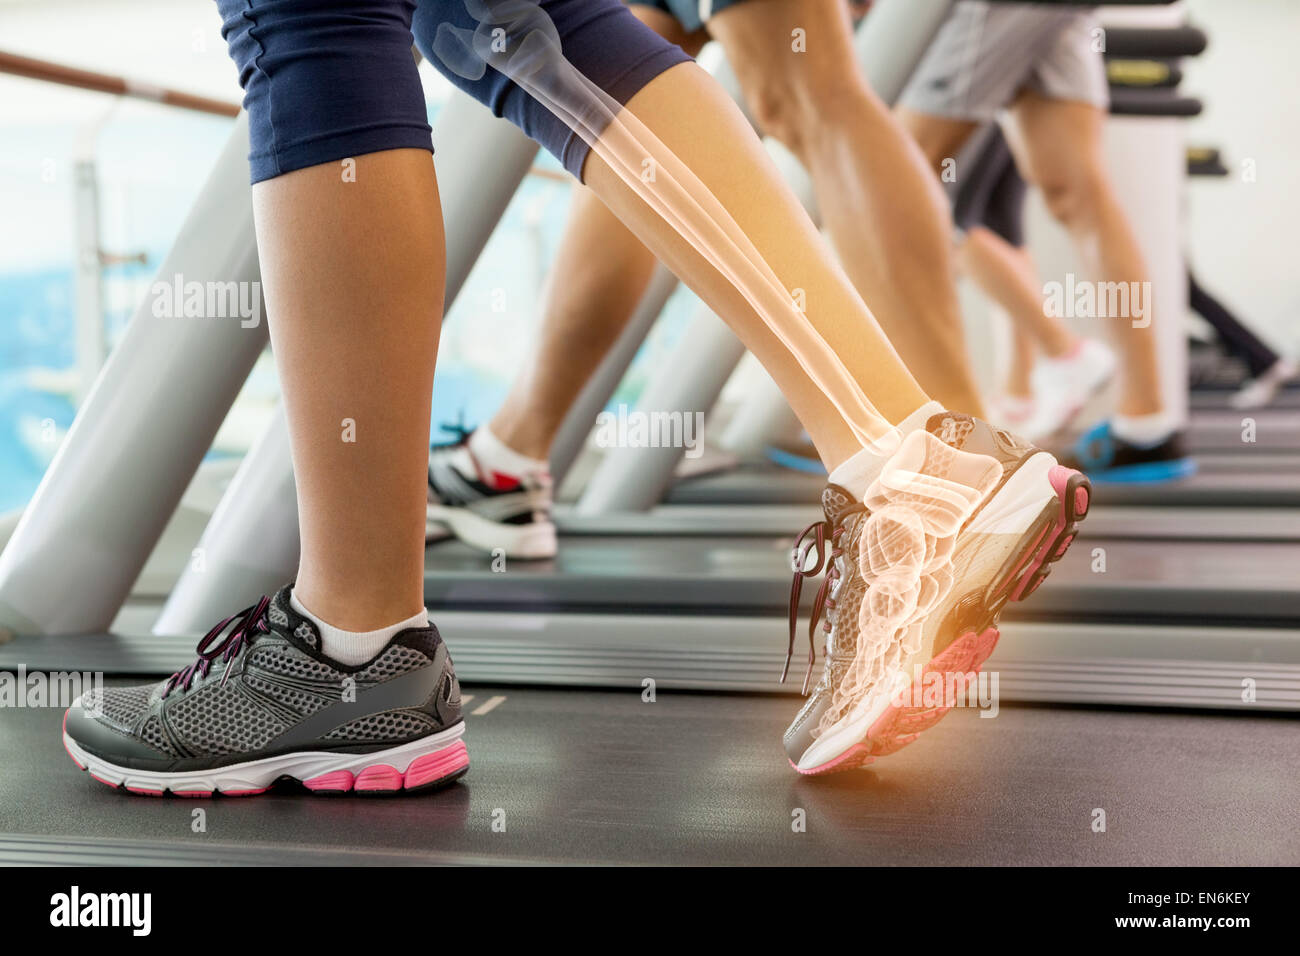 Highlighted ankle of woman on treadmill Stock Photo